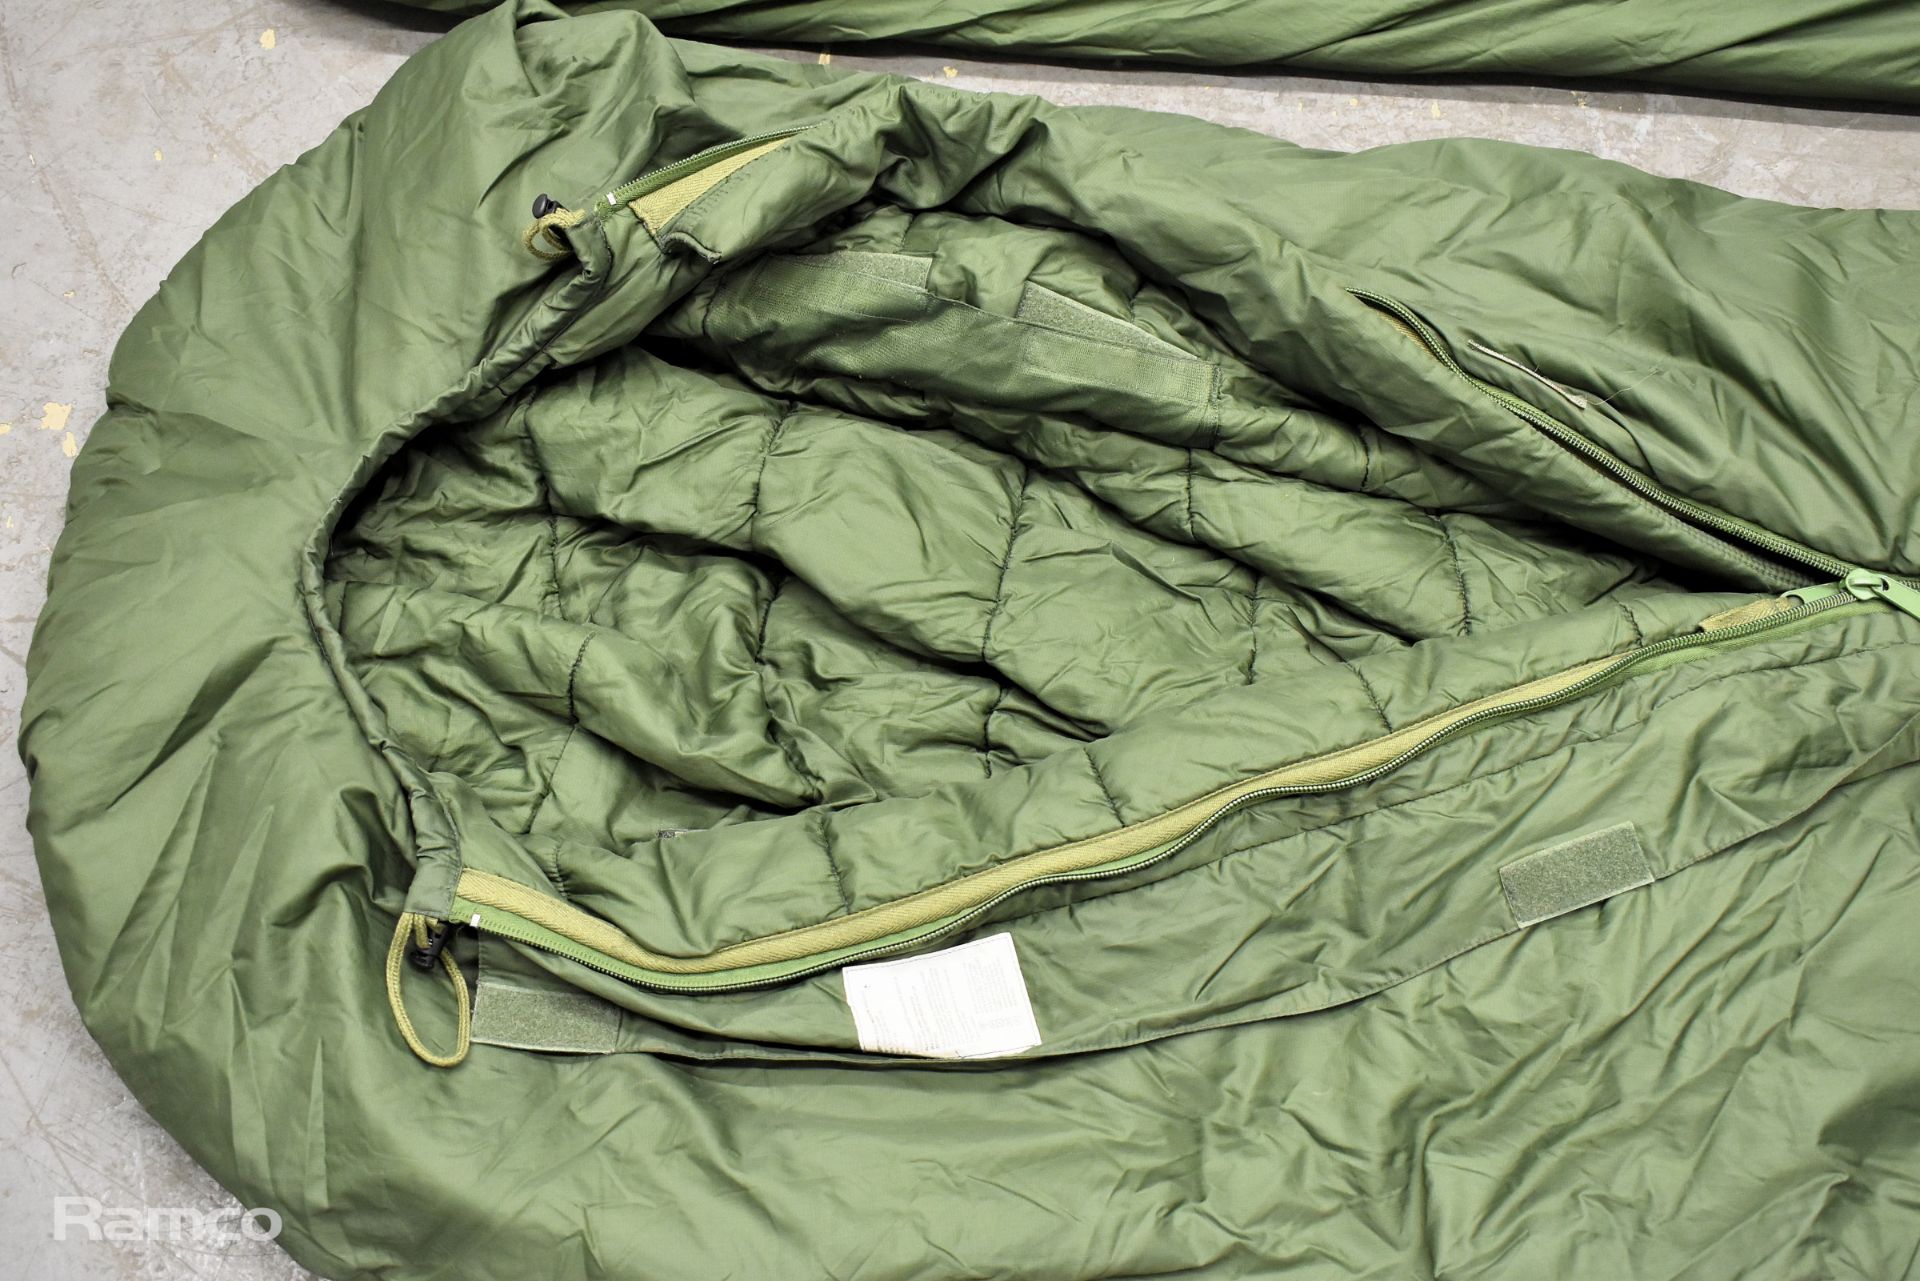 43x Sleeping bags - mixed grades and sizes - Image 7 of 8